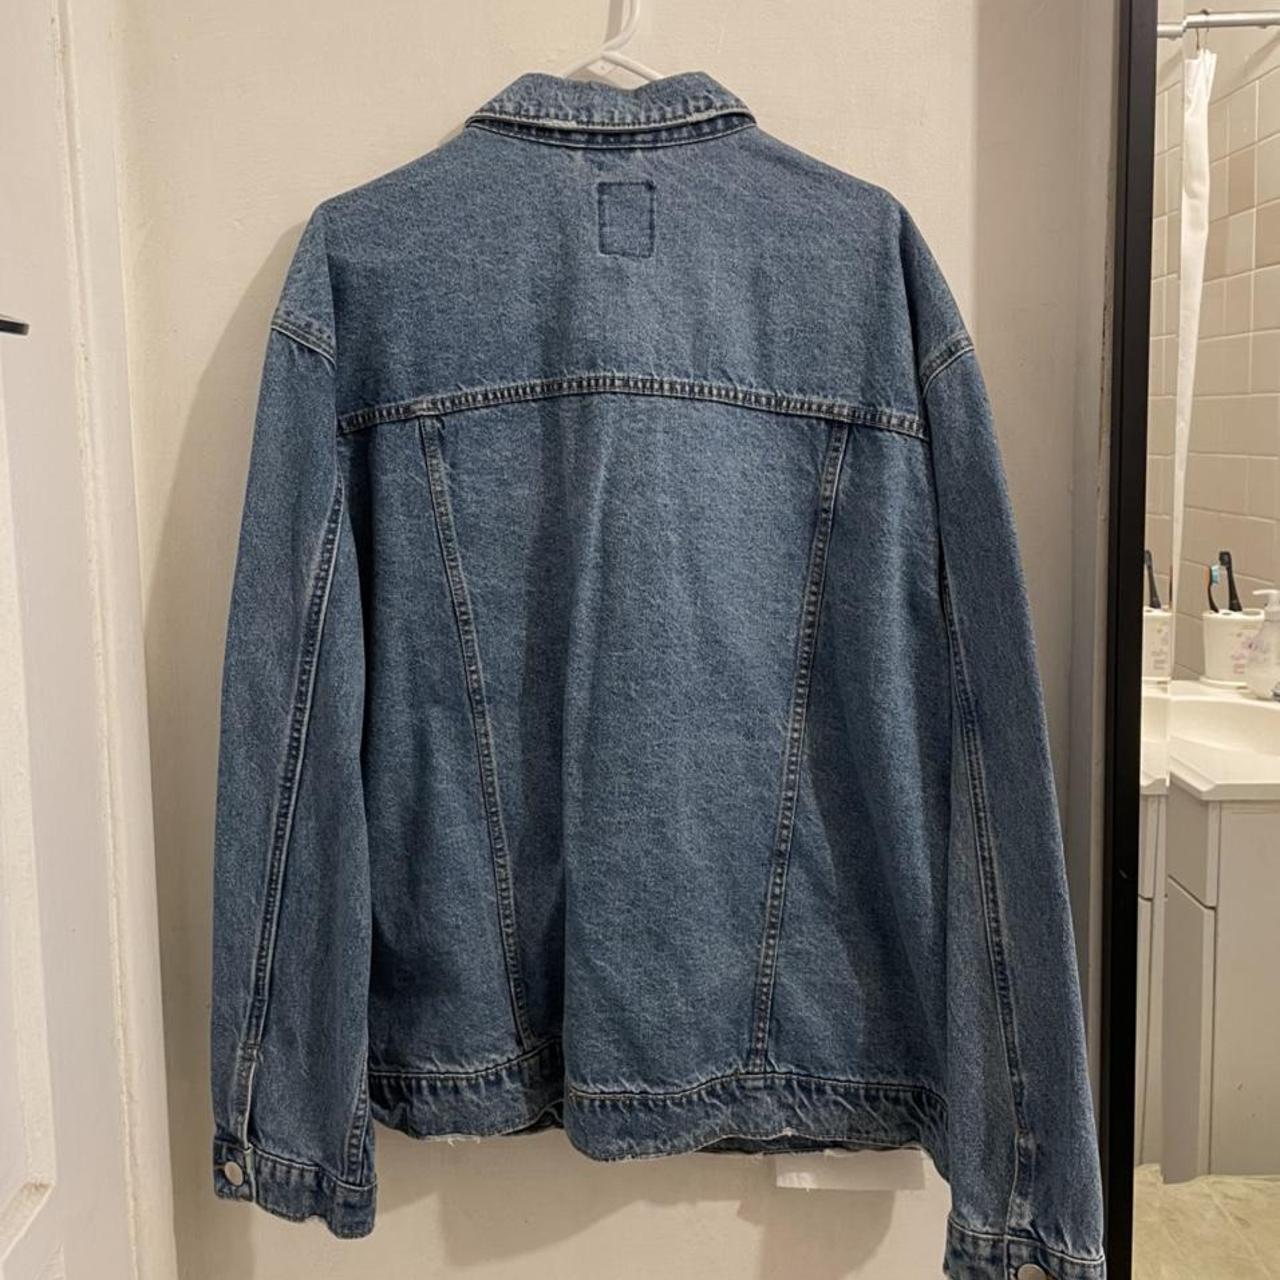 Product Image 2 - Oversized blue Jean jacket from